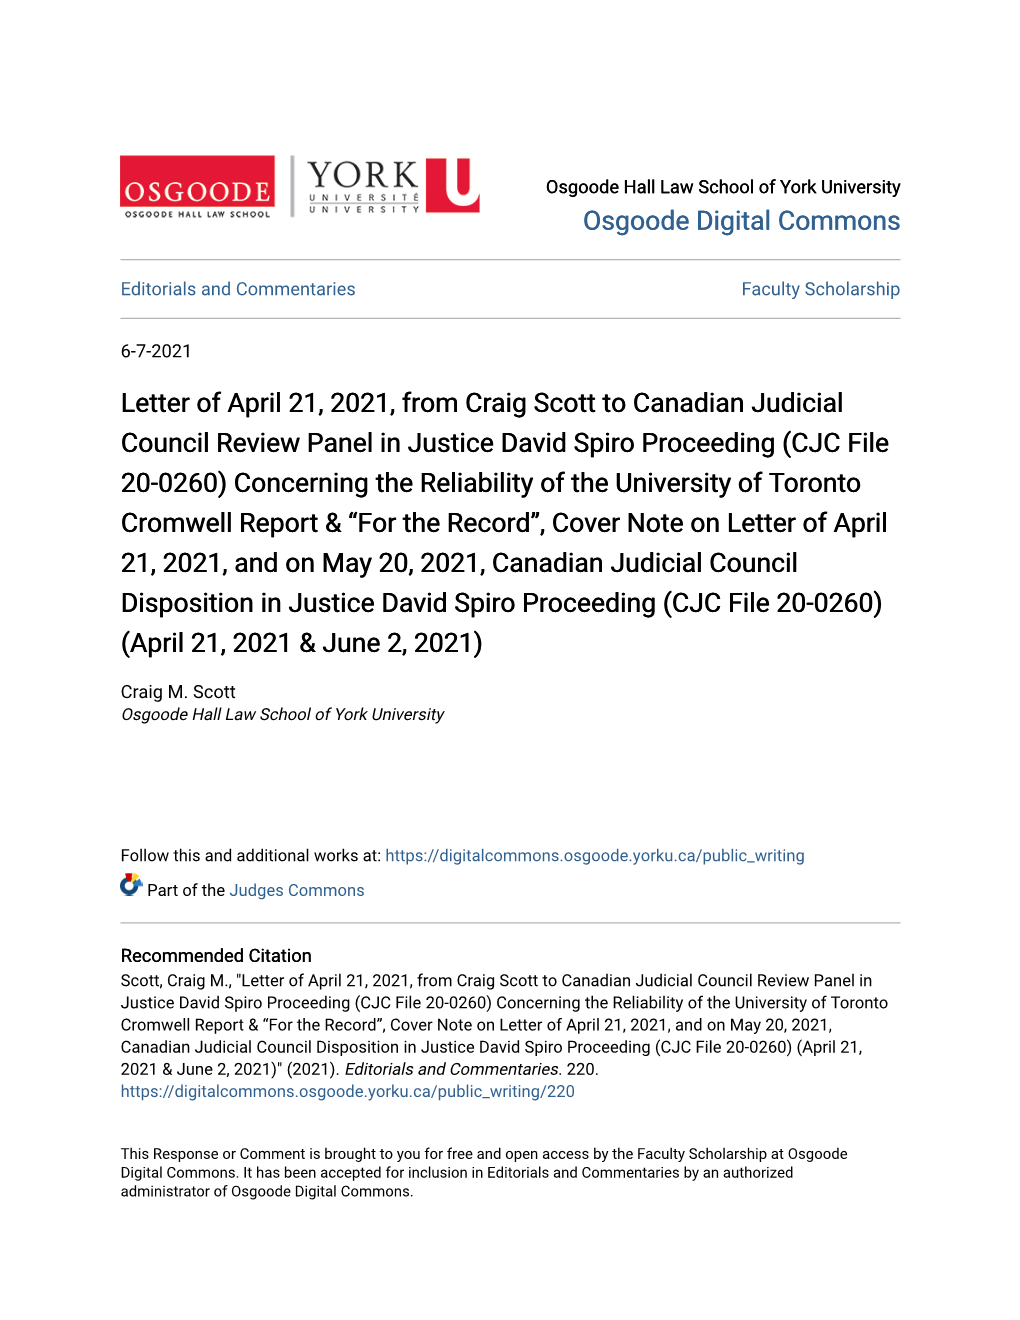 Letter of April 21, 2021, from Craig Scott to Canadian Judicial Council